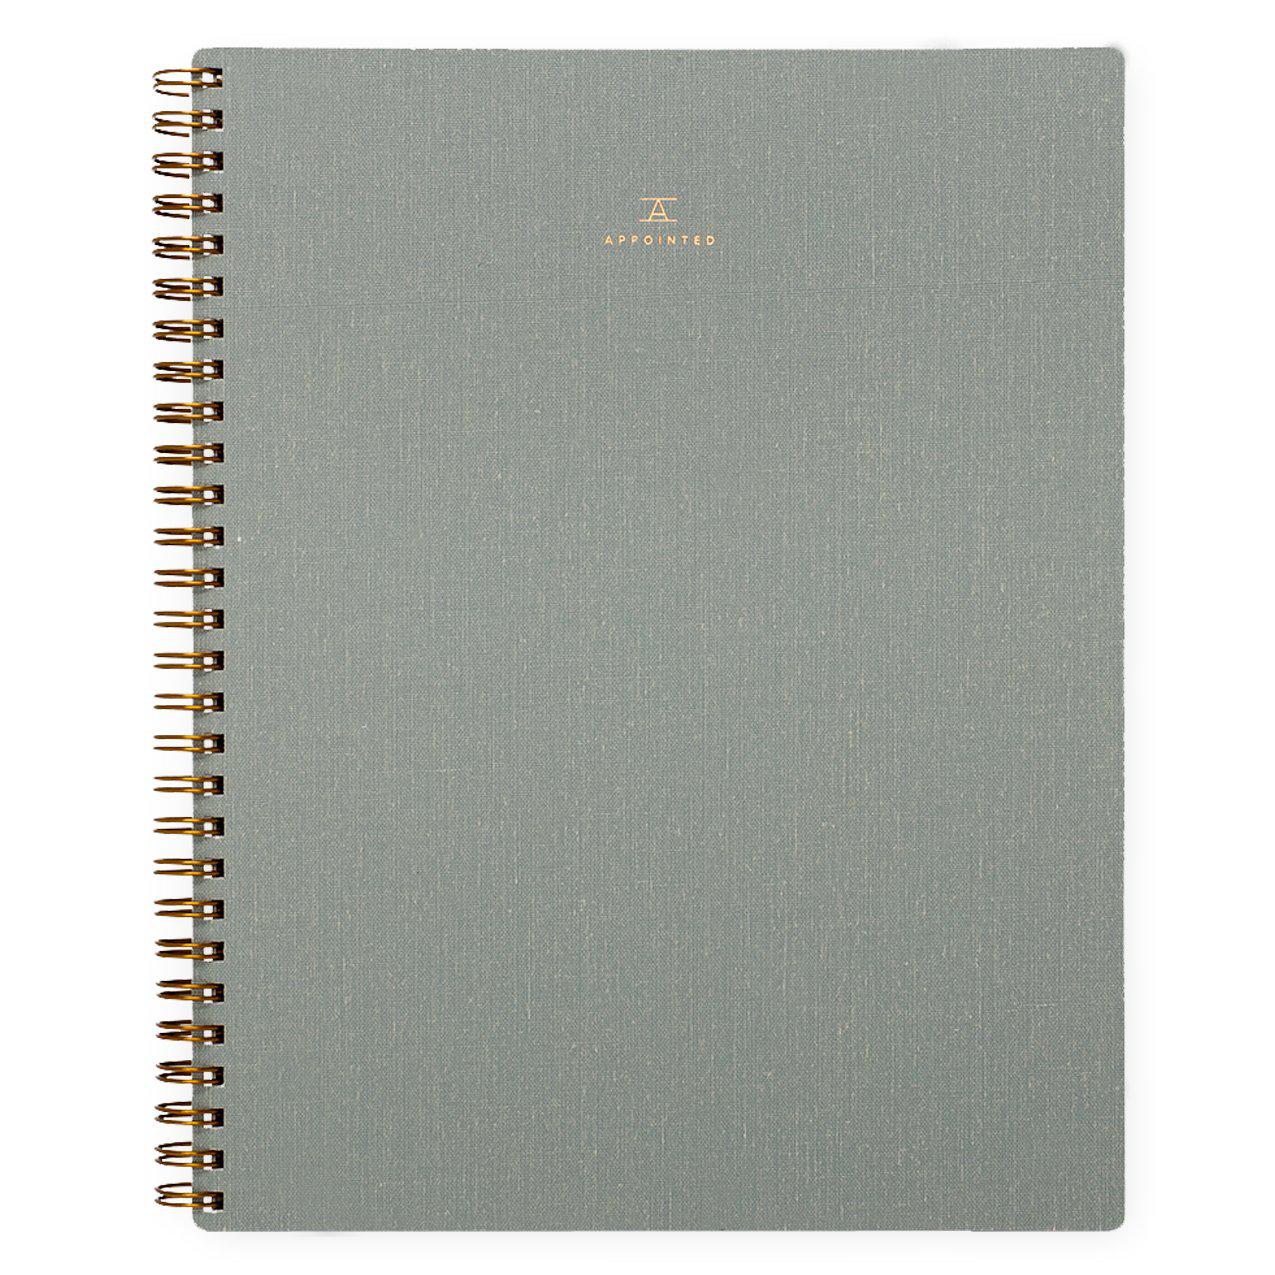 Dove Grey Notebook | Lined or Grid